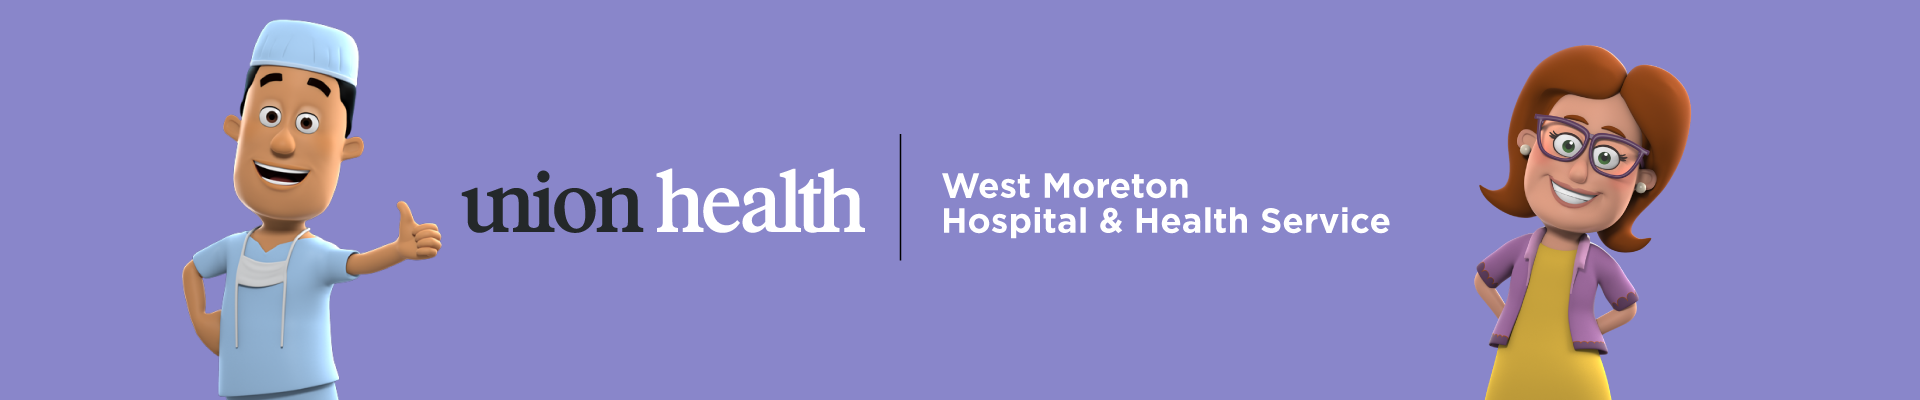 UH-West-Moreton-HHS-1920x400.png